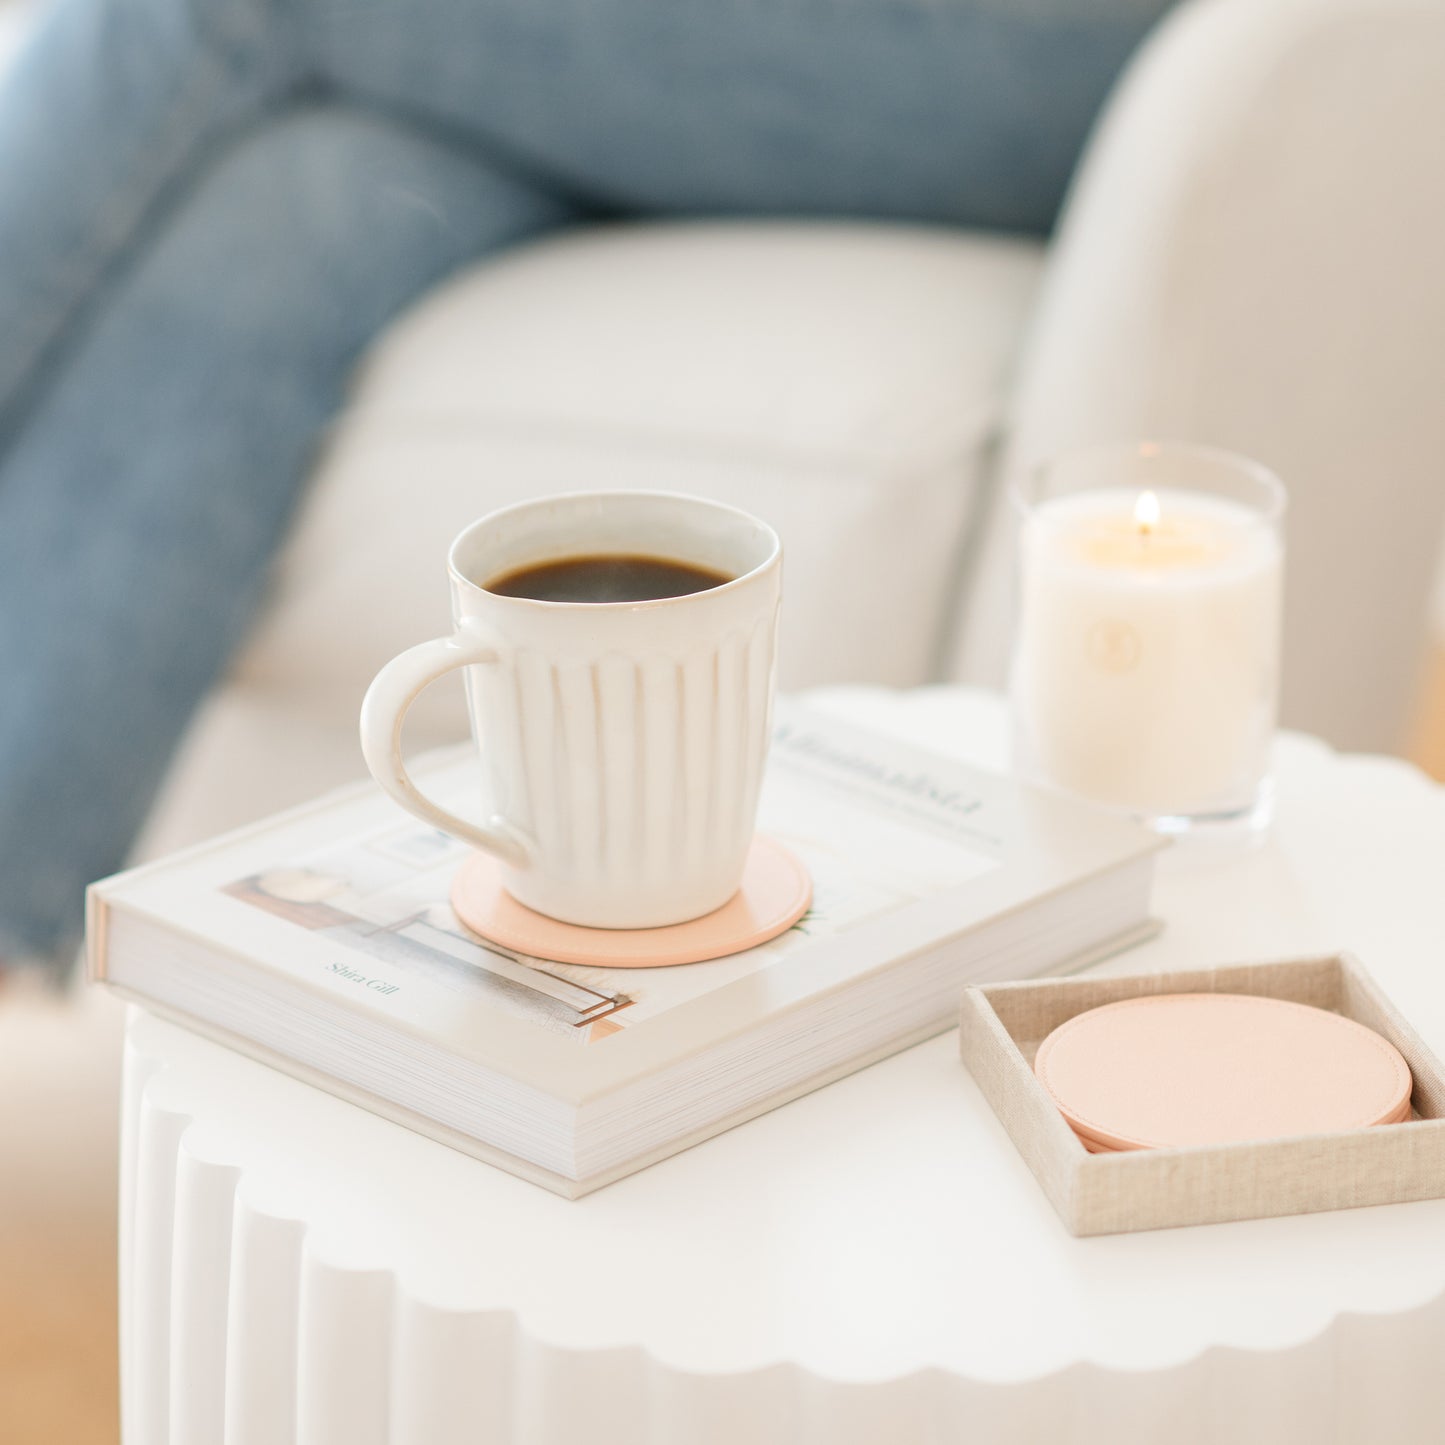 Pink coaster on side table with coffee